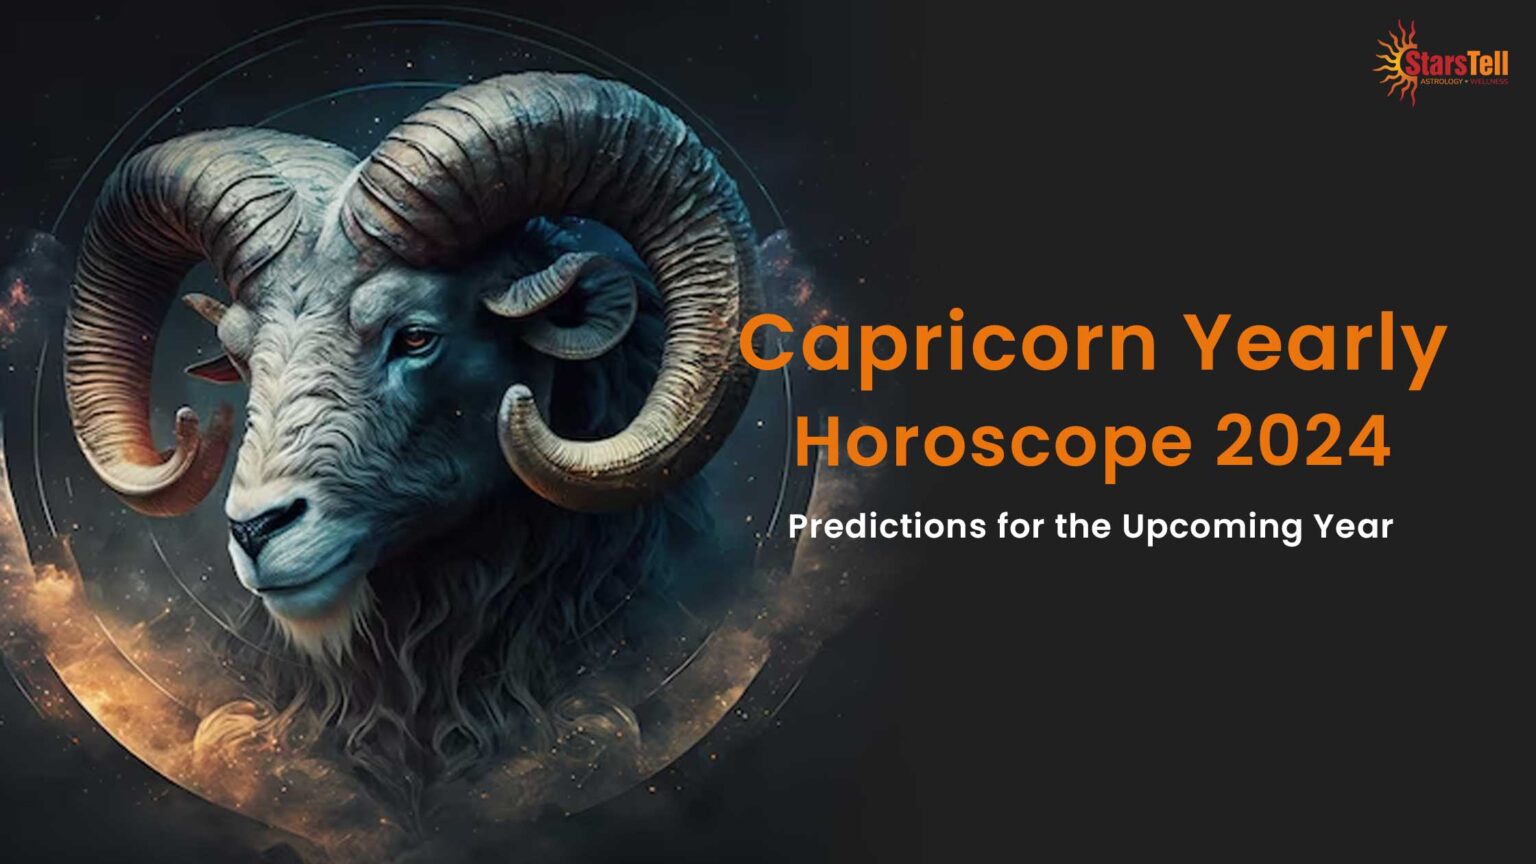 Capricorn Yearly Horoscope 2024 Predictions for the Year